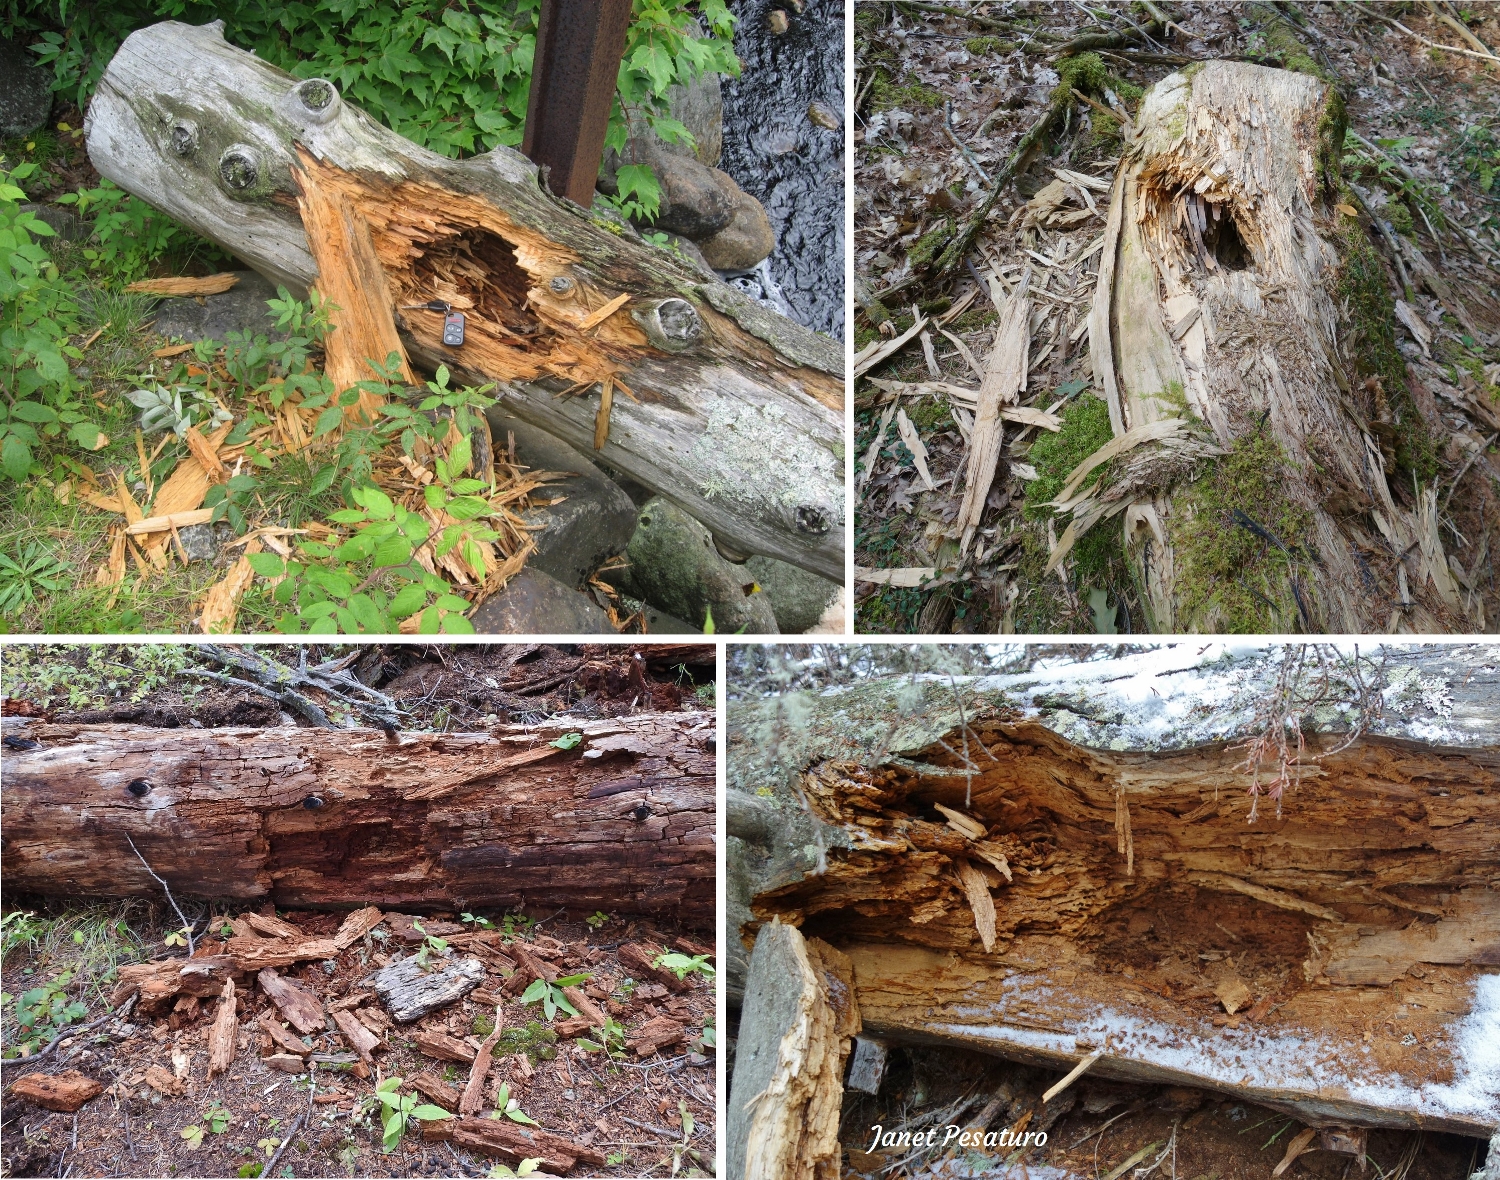 sign of bears foraging for insects in logs